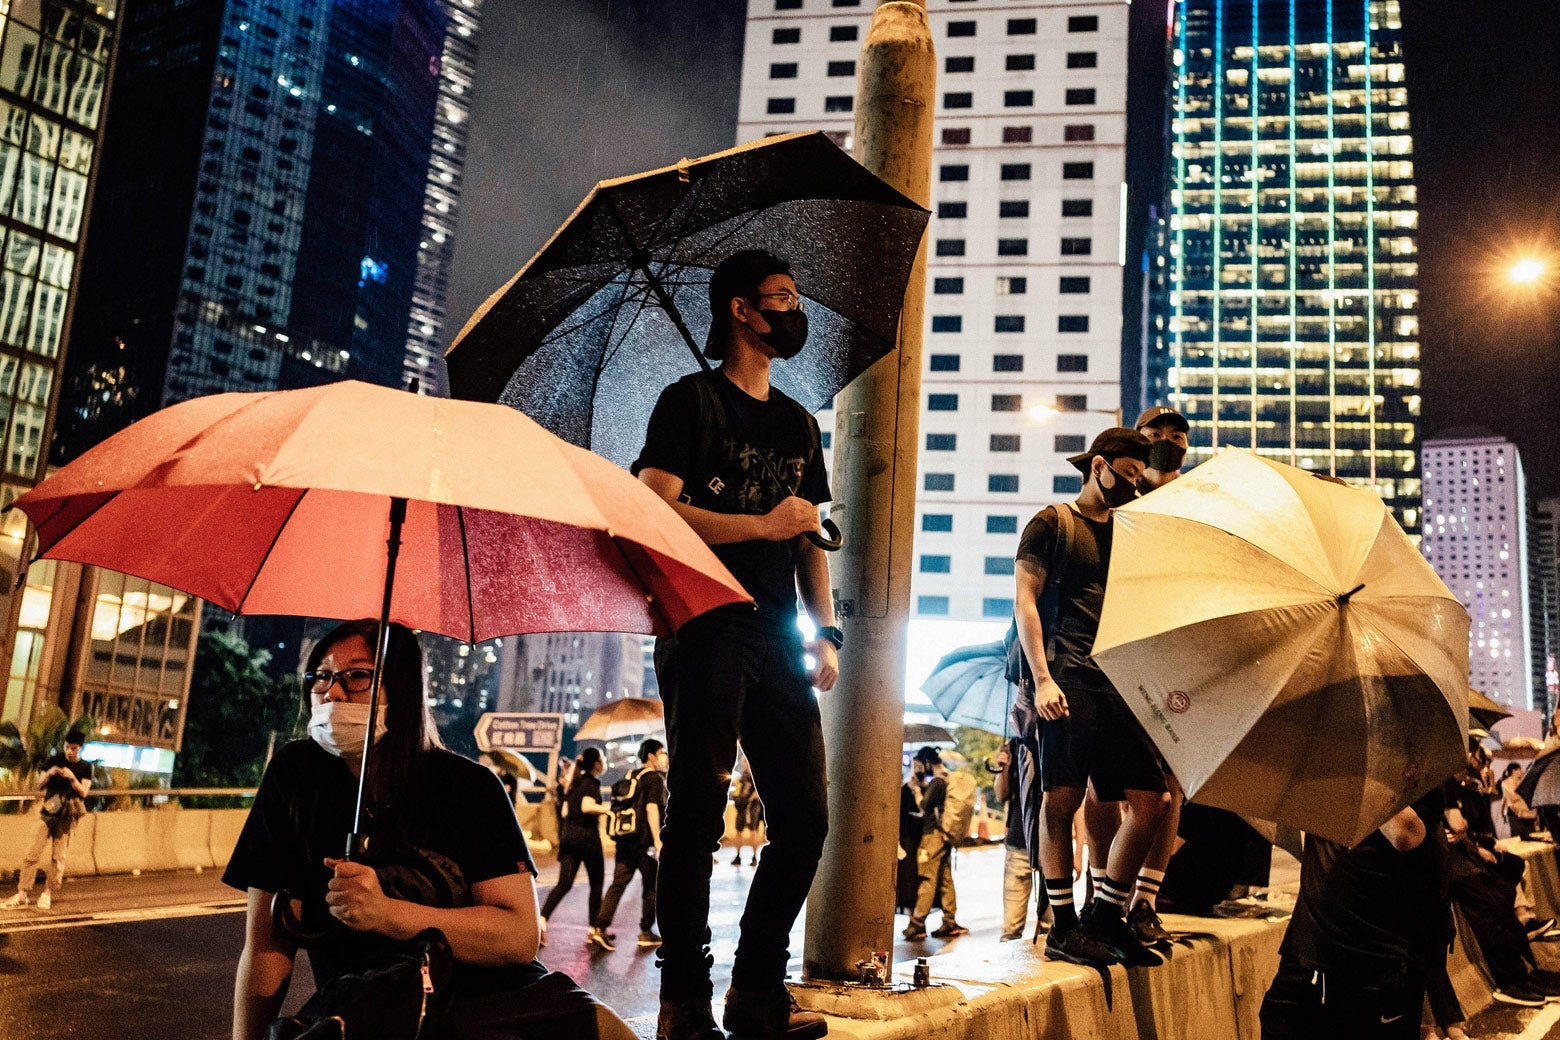 Protesters gather outside the Central Government Complex after a demonstration in Hong Kong.